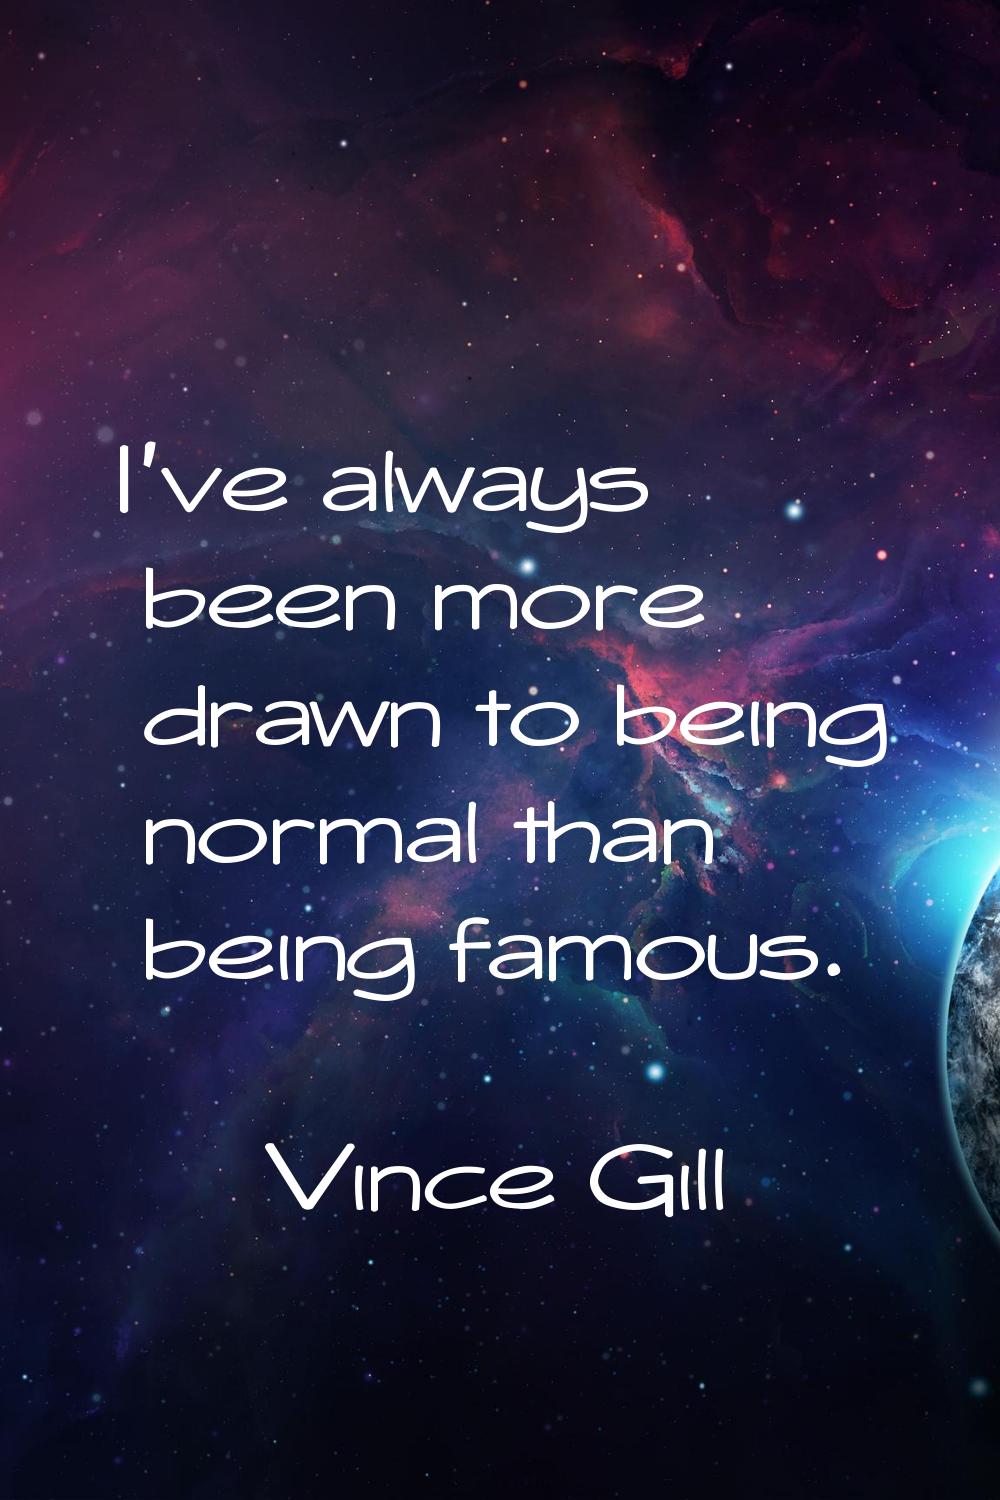 I've always been more drawn to being normal than being famous.